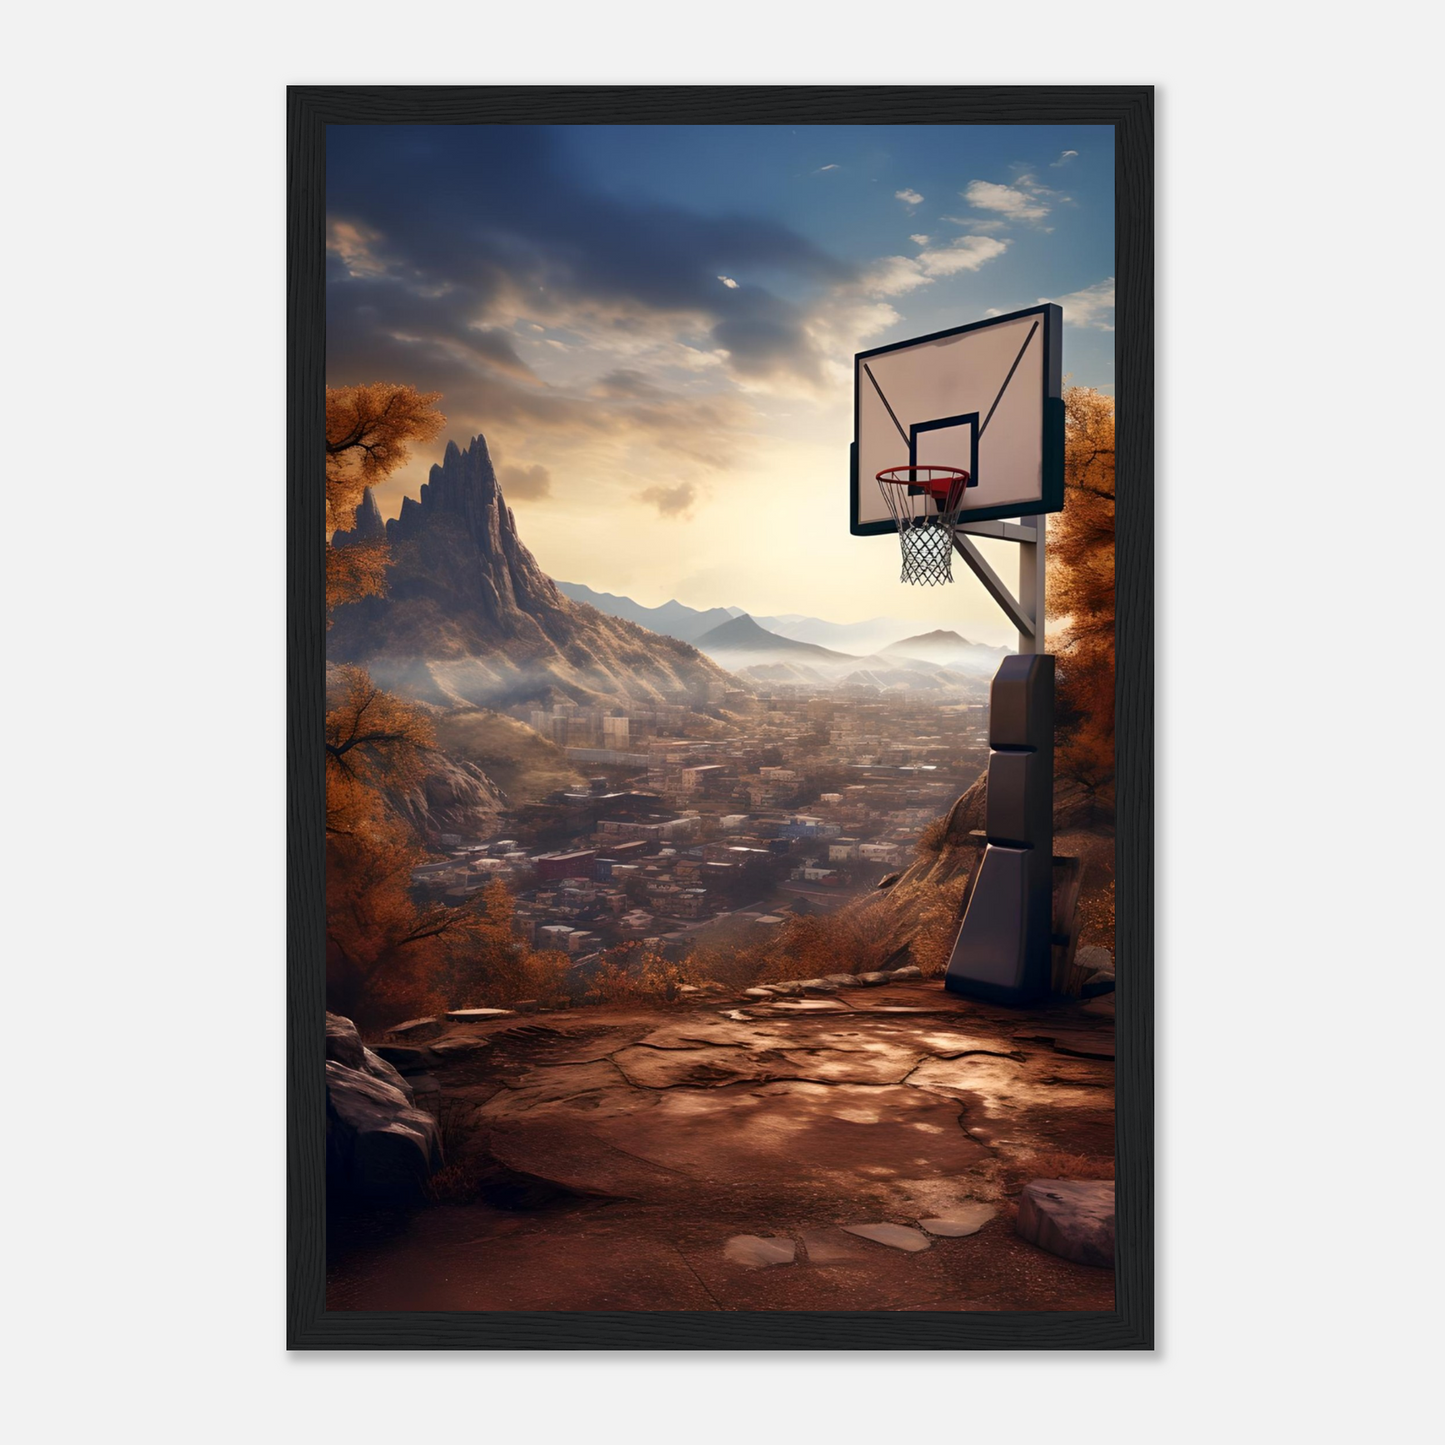 Basketball with a view